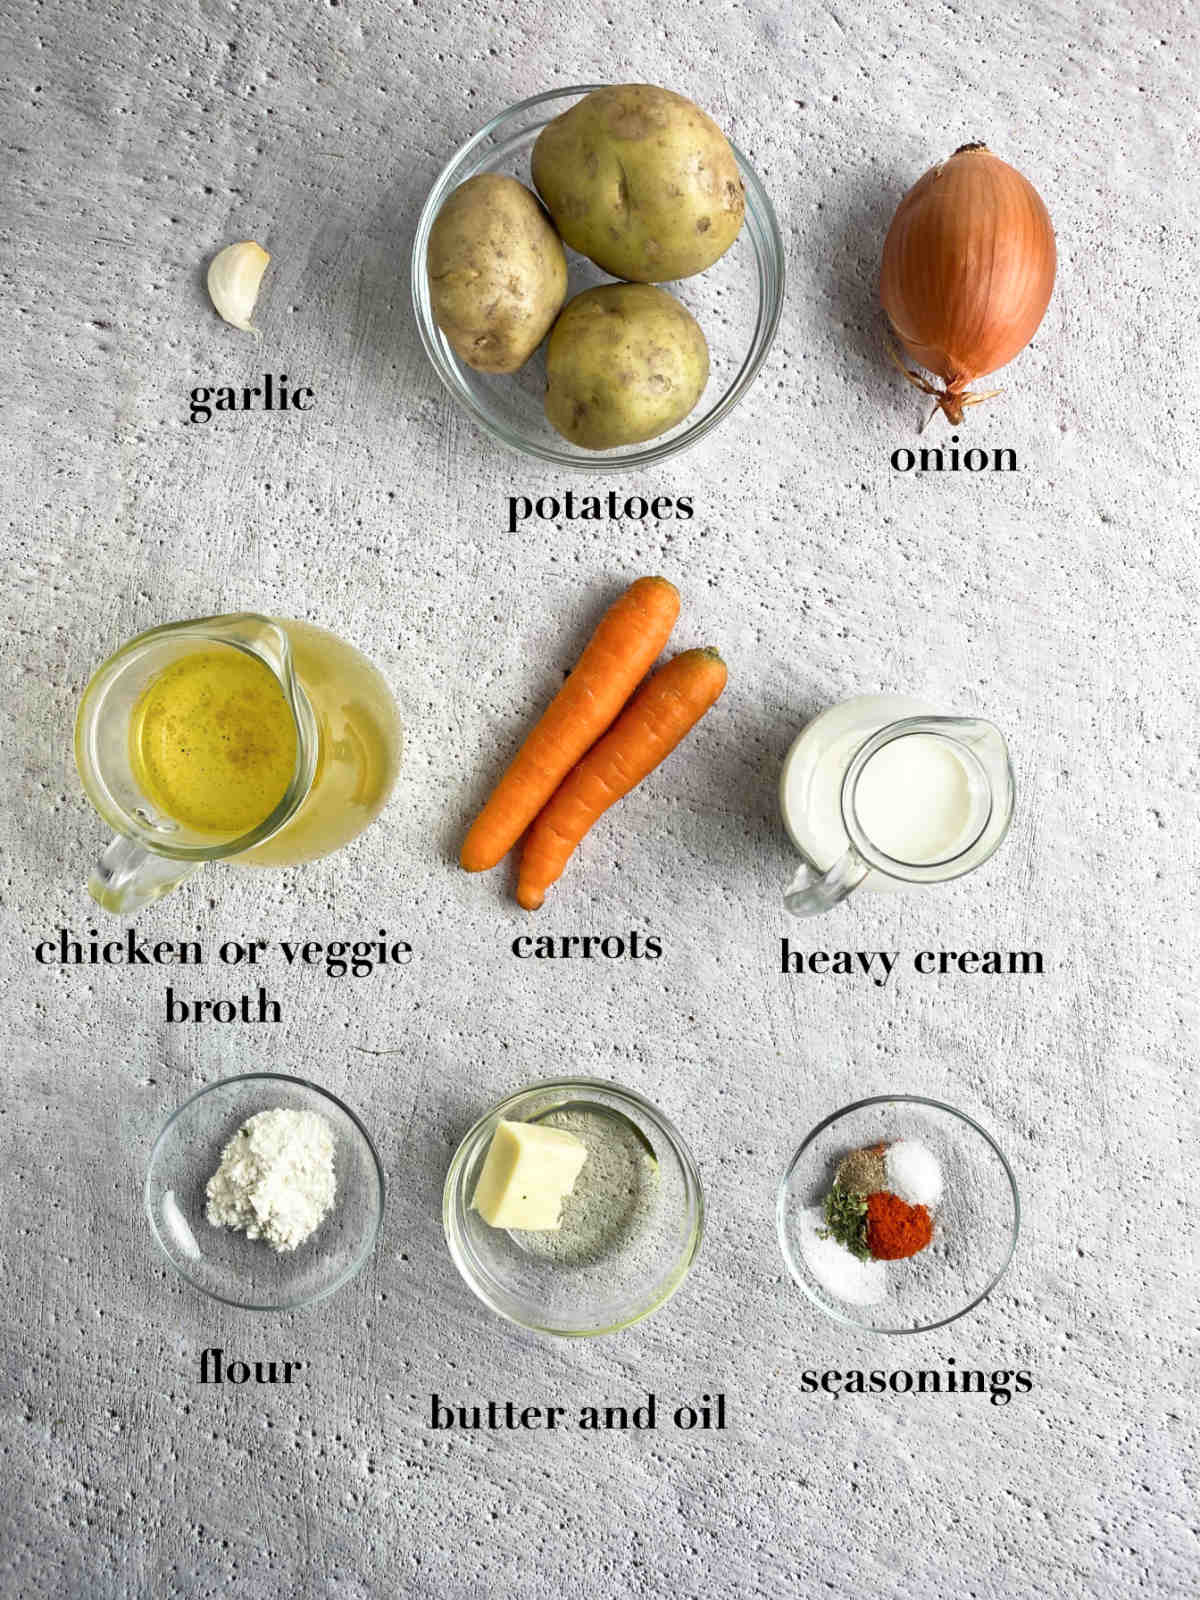 Ingredients for the soup on a gray table: garlic, onions, potatoes, broth, carrots, heavy cream, flour, butter, oil and seasonings. 